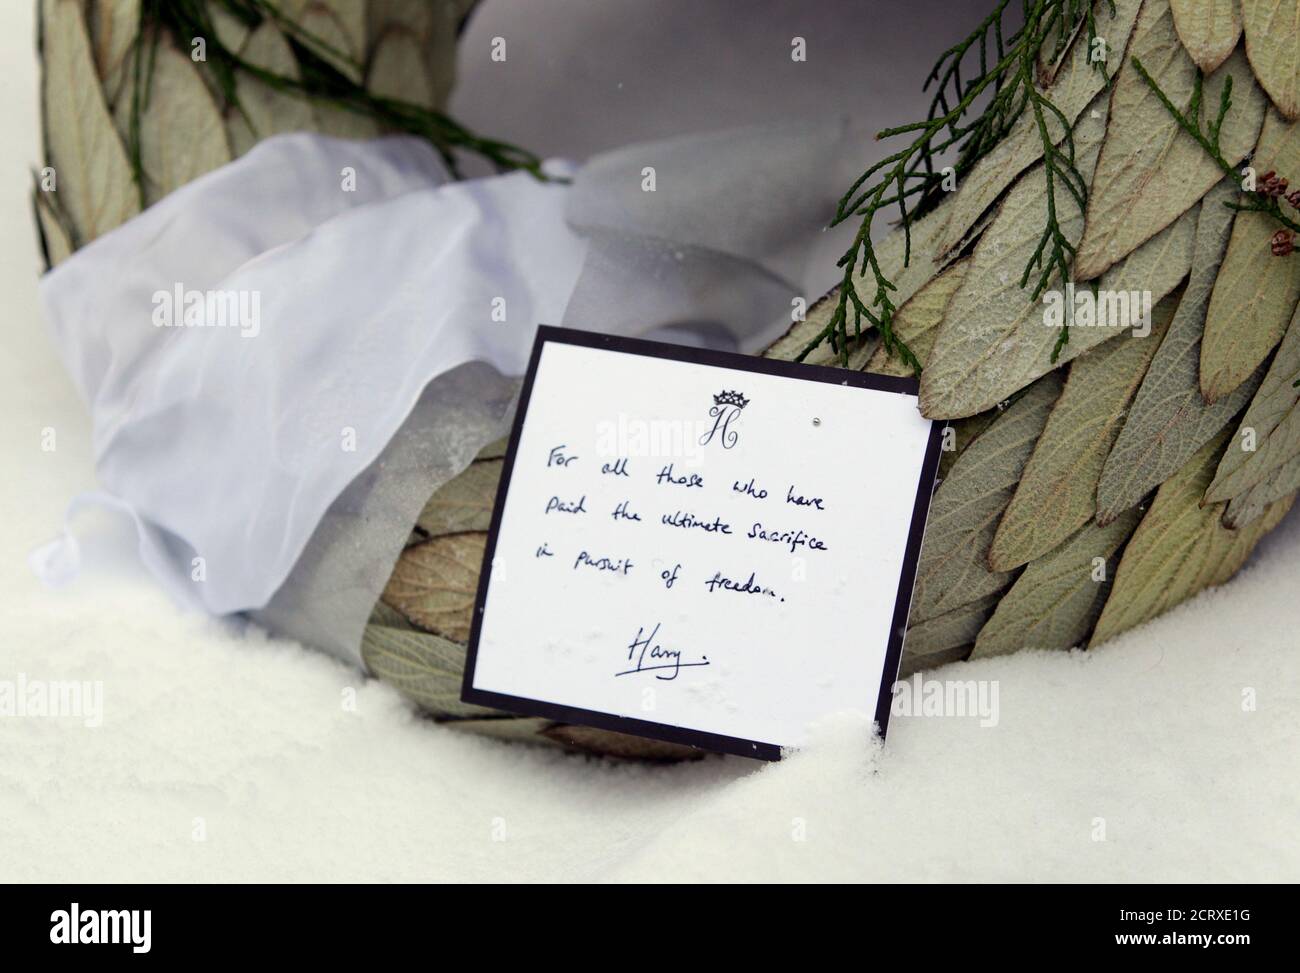 A picture shows the note attached to the wreath Britain's Prince Harry laid at the Berlin Wall memorial at Bernauer Street in Berlin, December 19, 2010. The memorial site remembers people who died at the Berlin wall or as a result of attempting to cross the border between East and West Berlin. The text reads: 'For all those who have paid the ultimate sacrifice in pursuit of freedom. Harry.'    REUTERS/Thomas Peter  (GERMANY - Tags: POLITICS ROYALS) Stock Photo